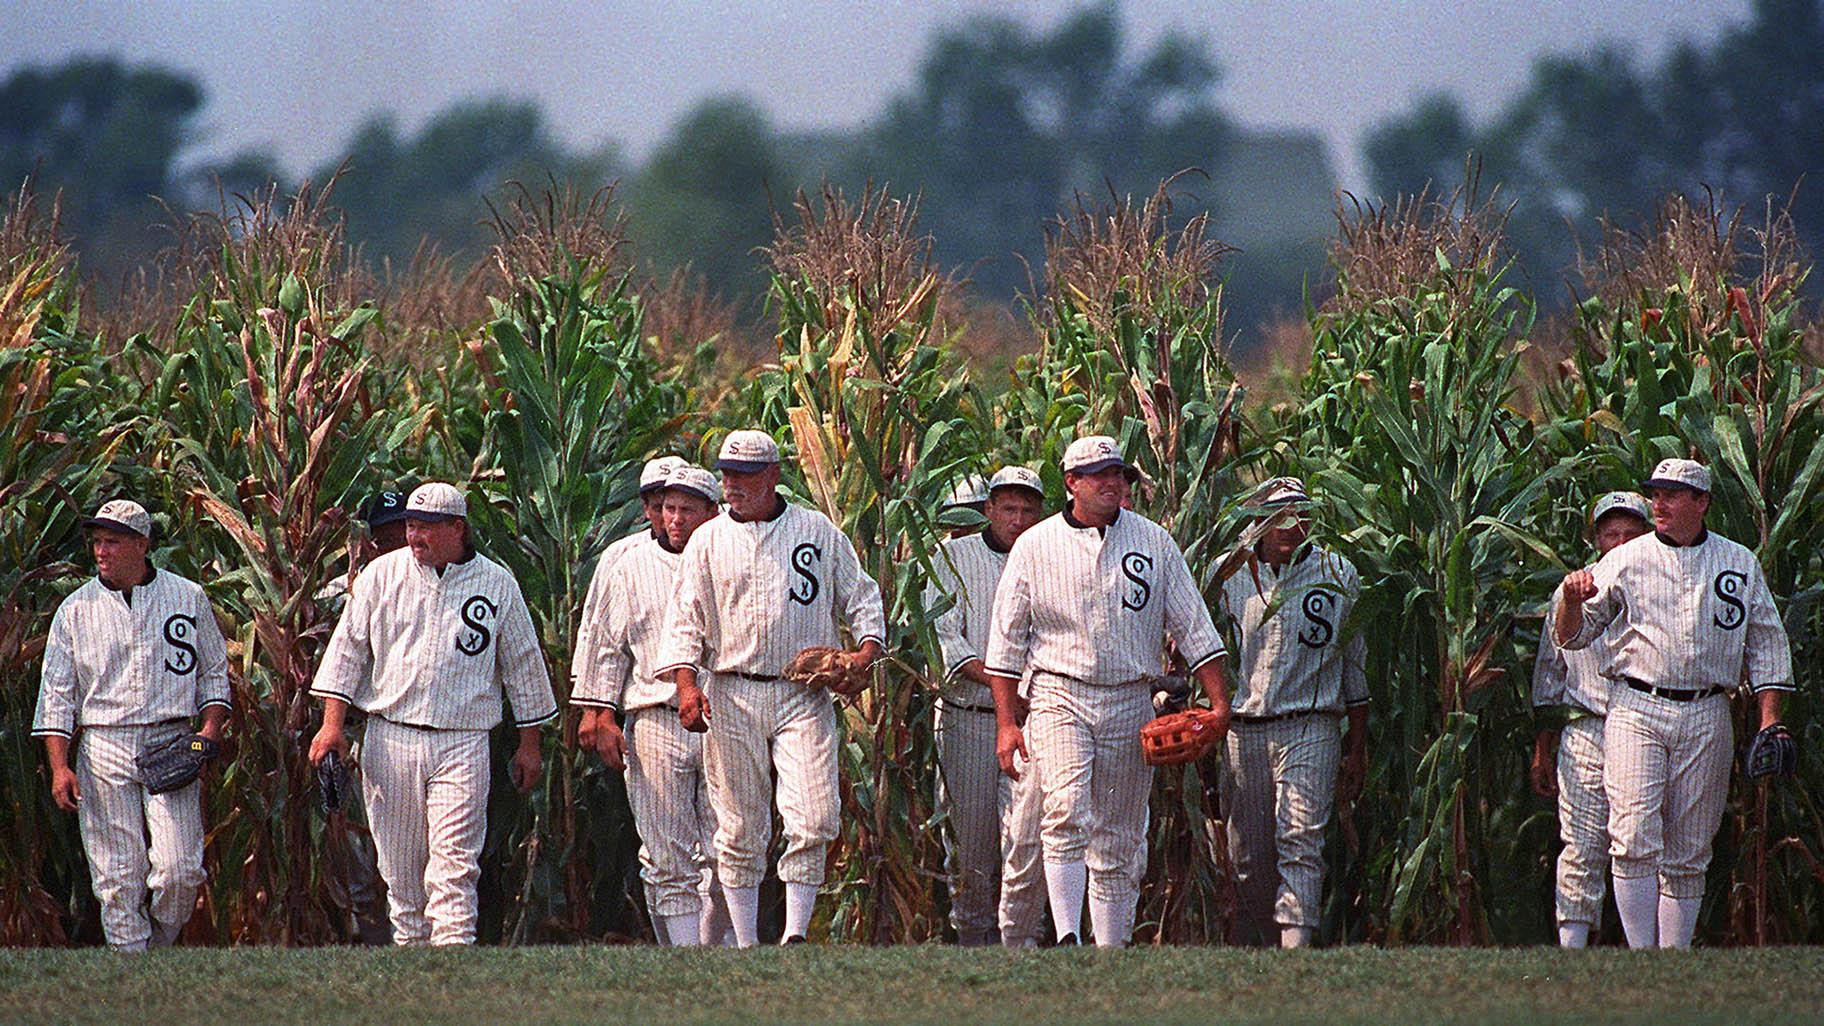 White Sox, Yankees Reveal Uniforms for Field of Dreams Game –  SportsLogos.Net News